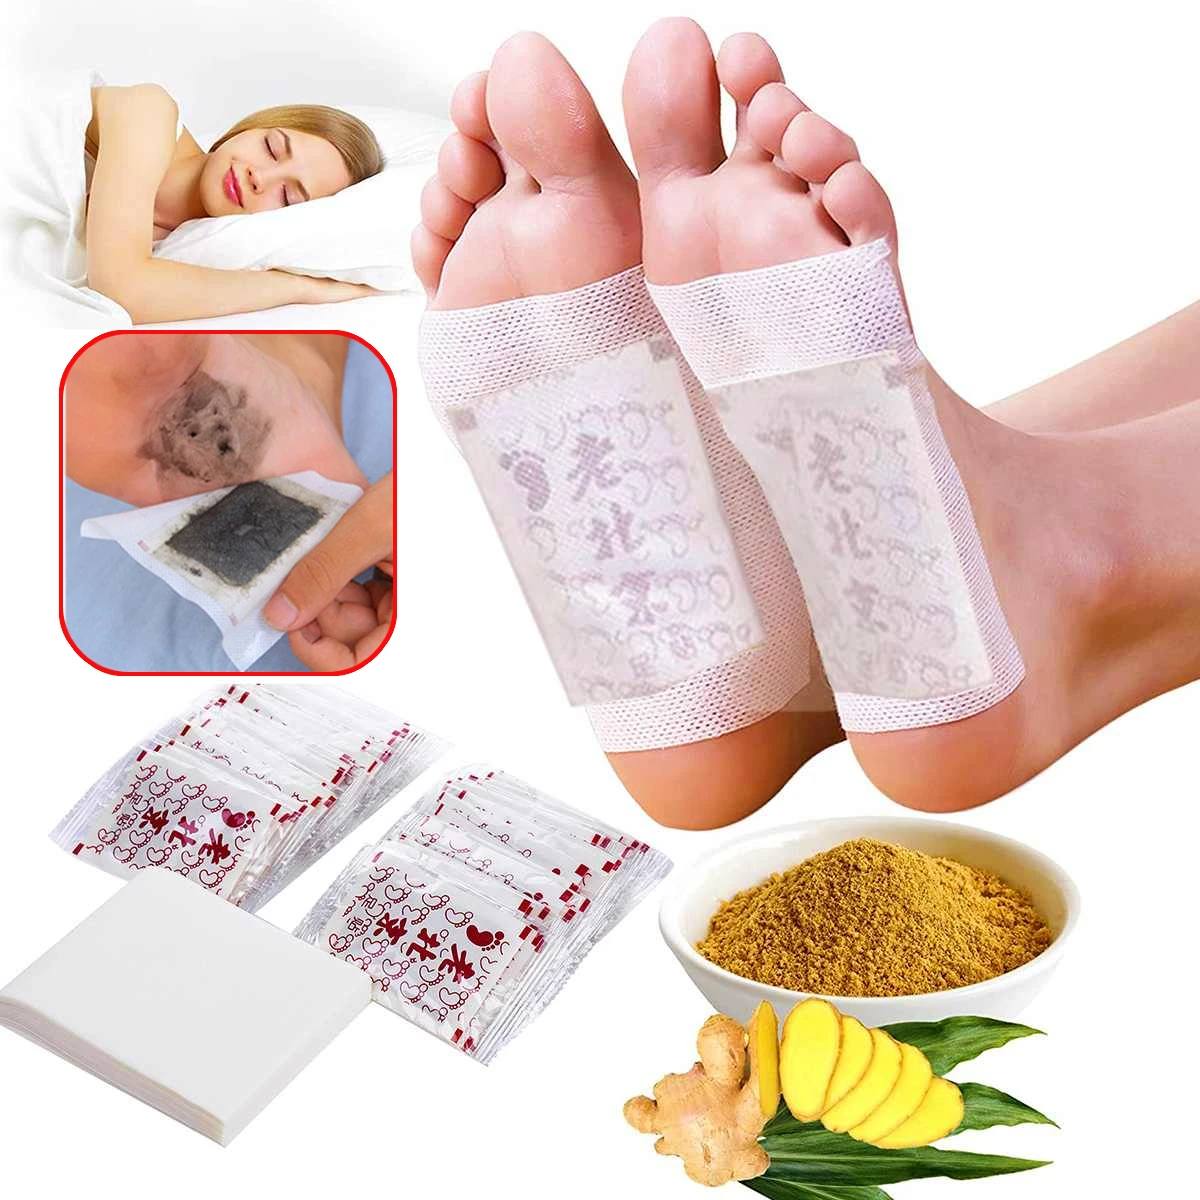 

100-200 Pcs Detox Foot Patches Stickers Bamboo Vinegar Organic Herbal Cleansing Pads Slimming Weight Loss Body Health Care